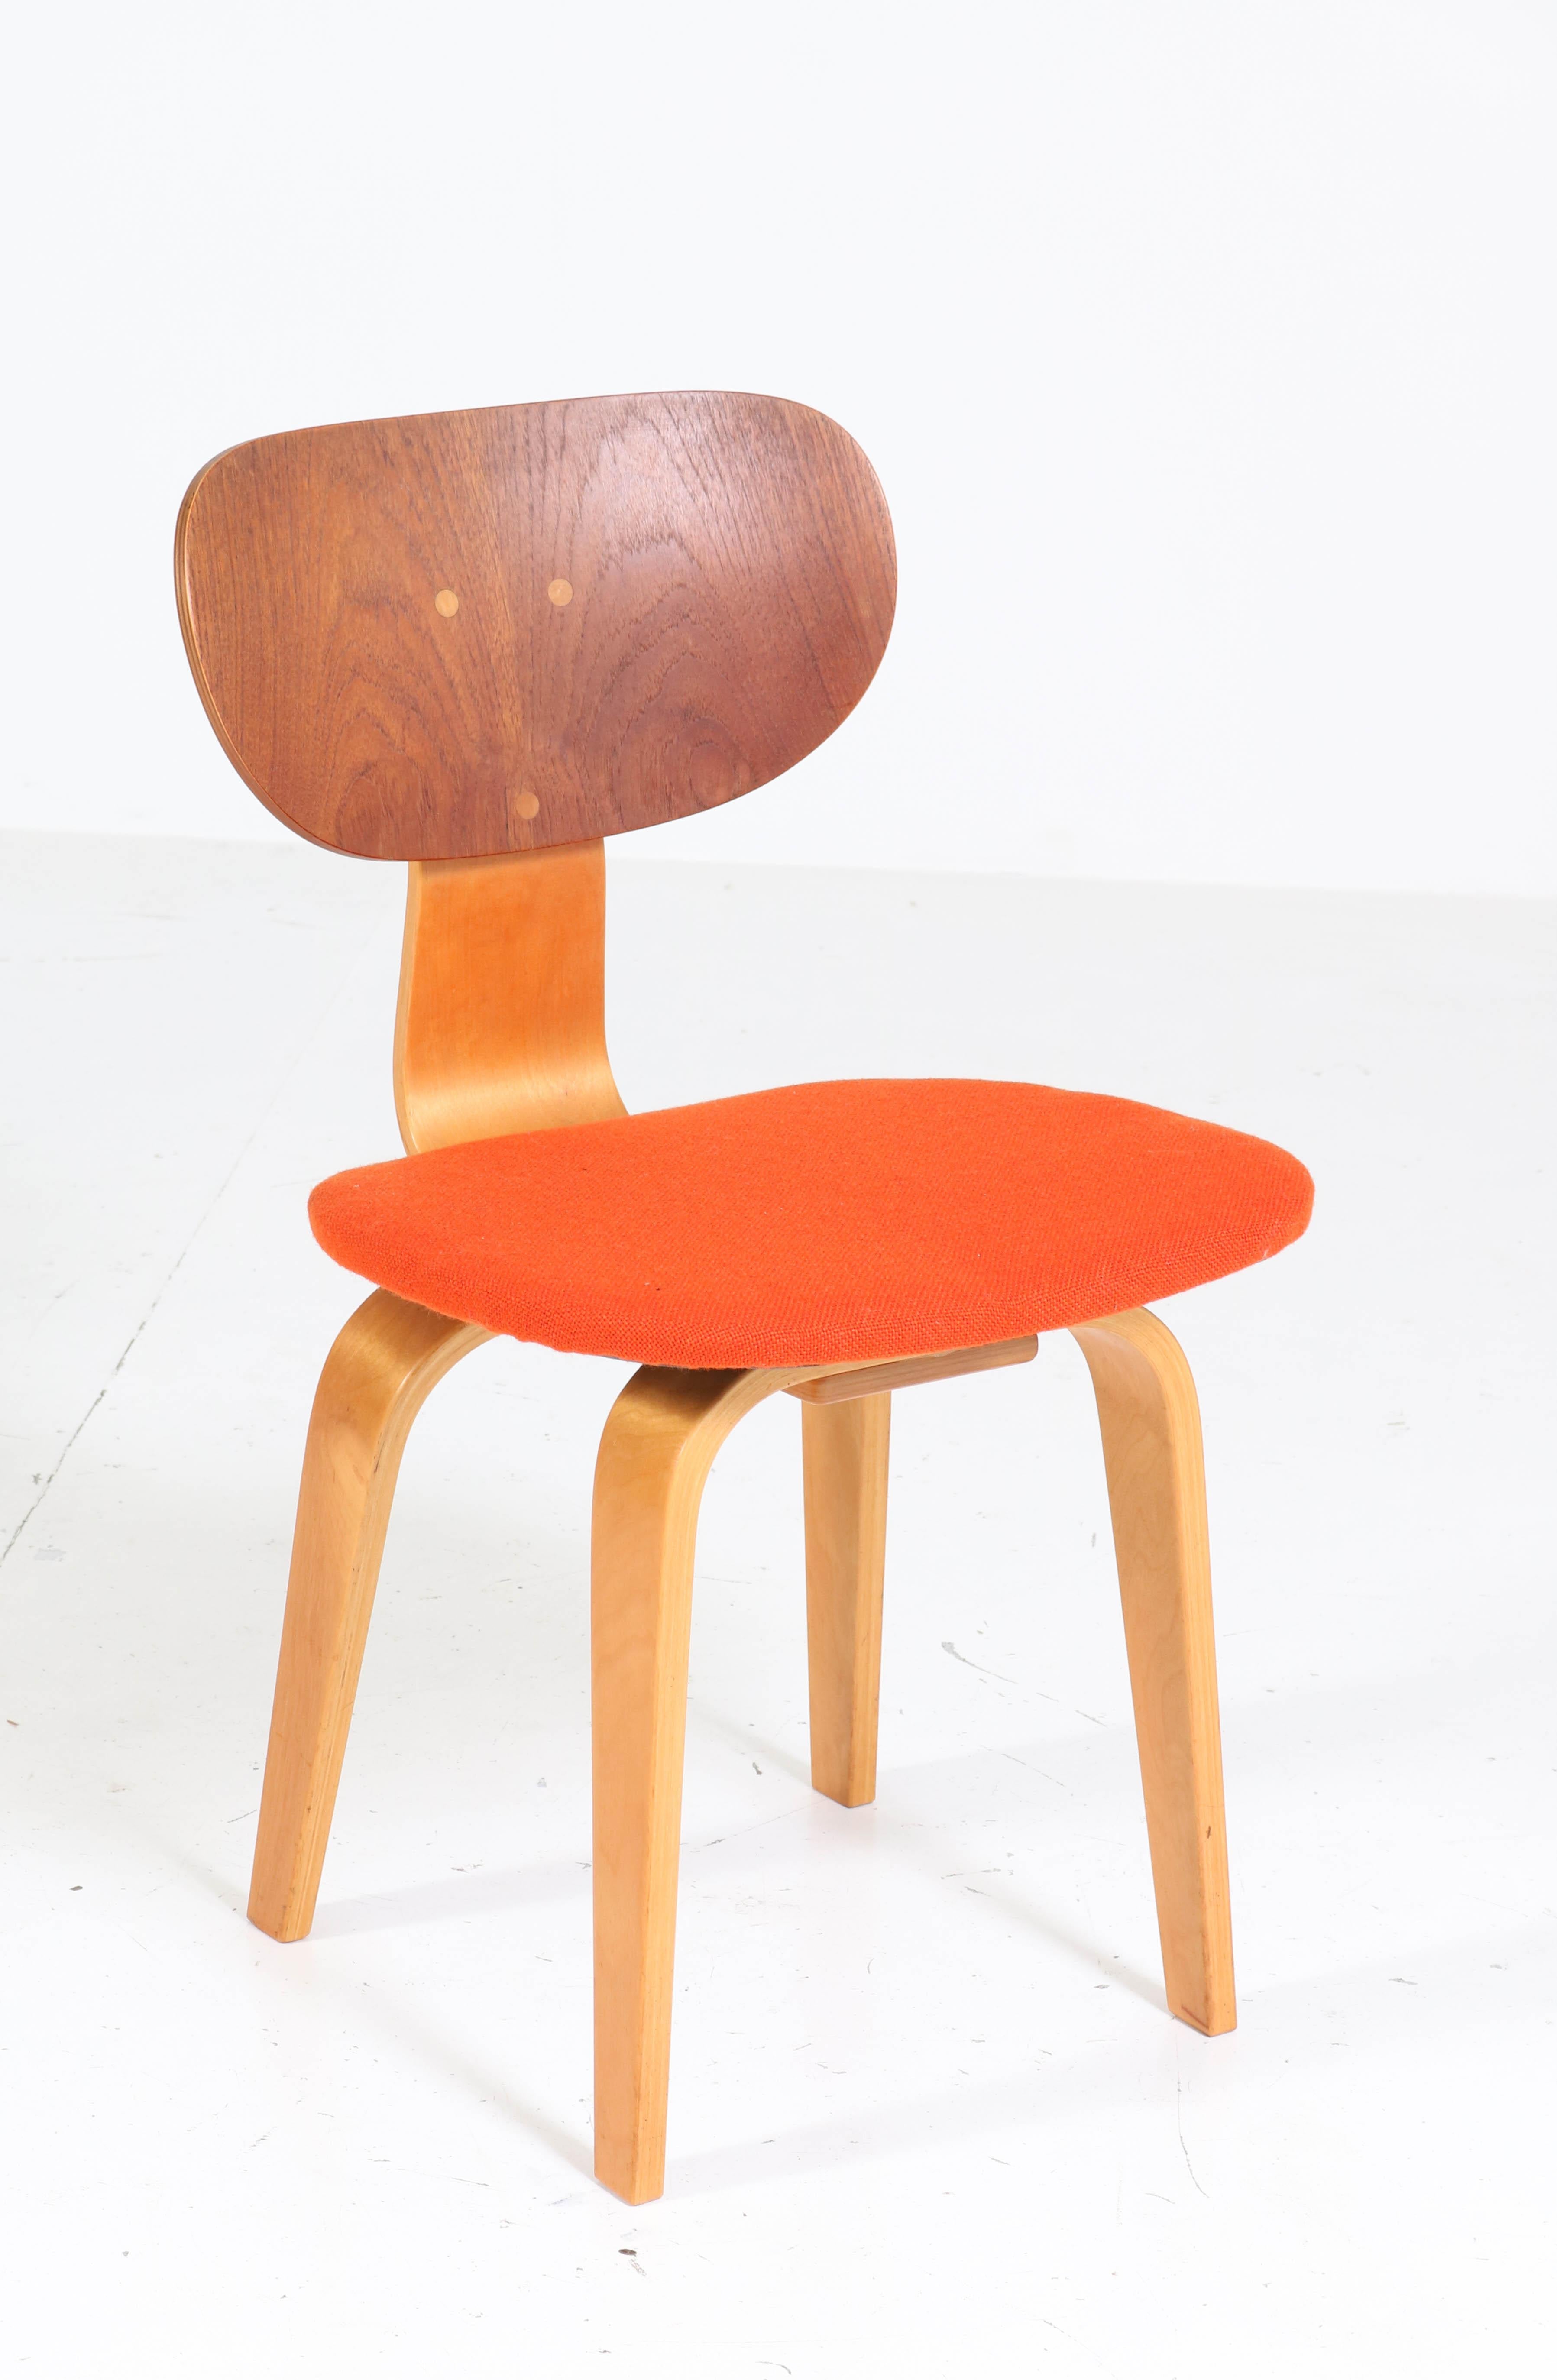 Mid-20th Century Birch and Teak Mid-Century Modern Sb02 Chair by Cees Braakman for Pastoe, 1952